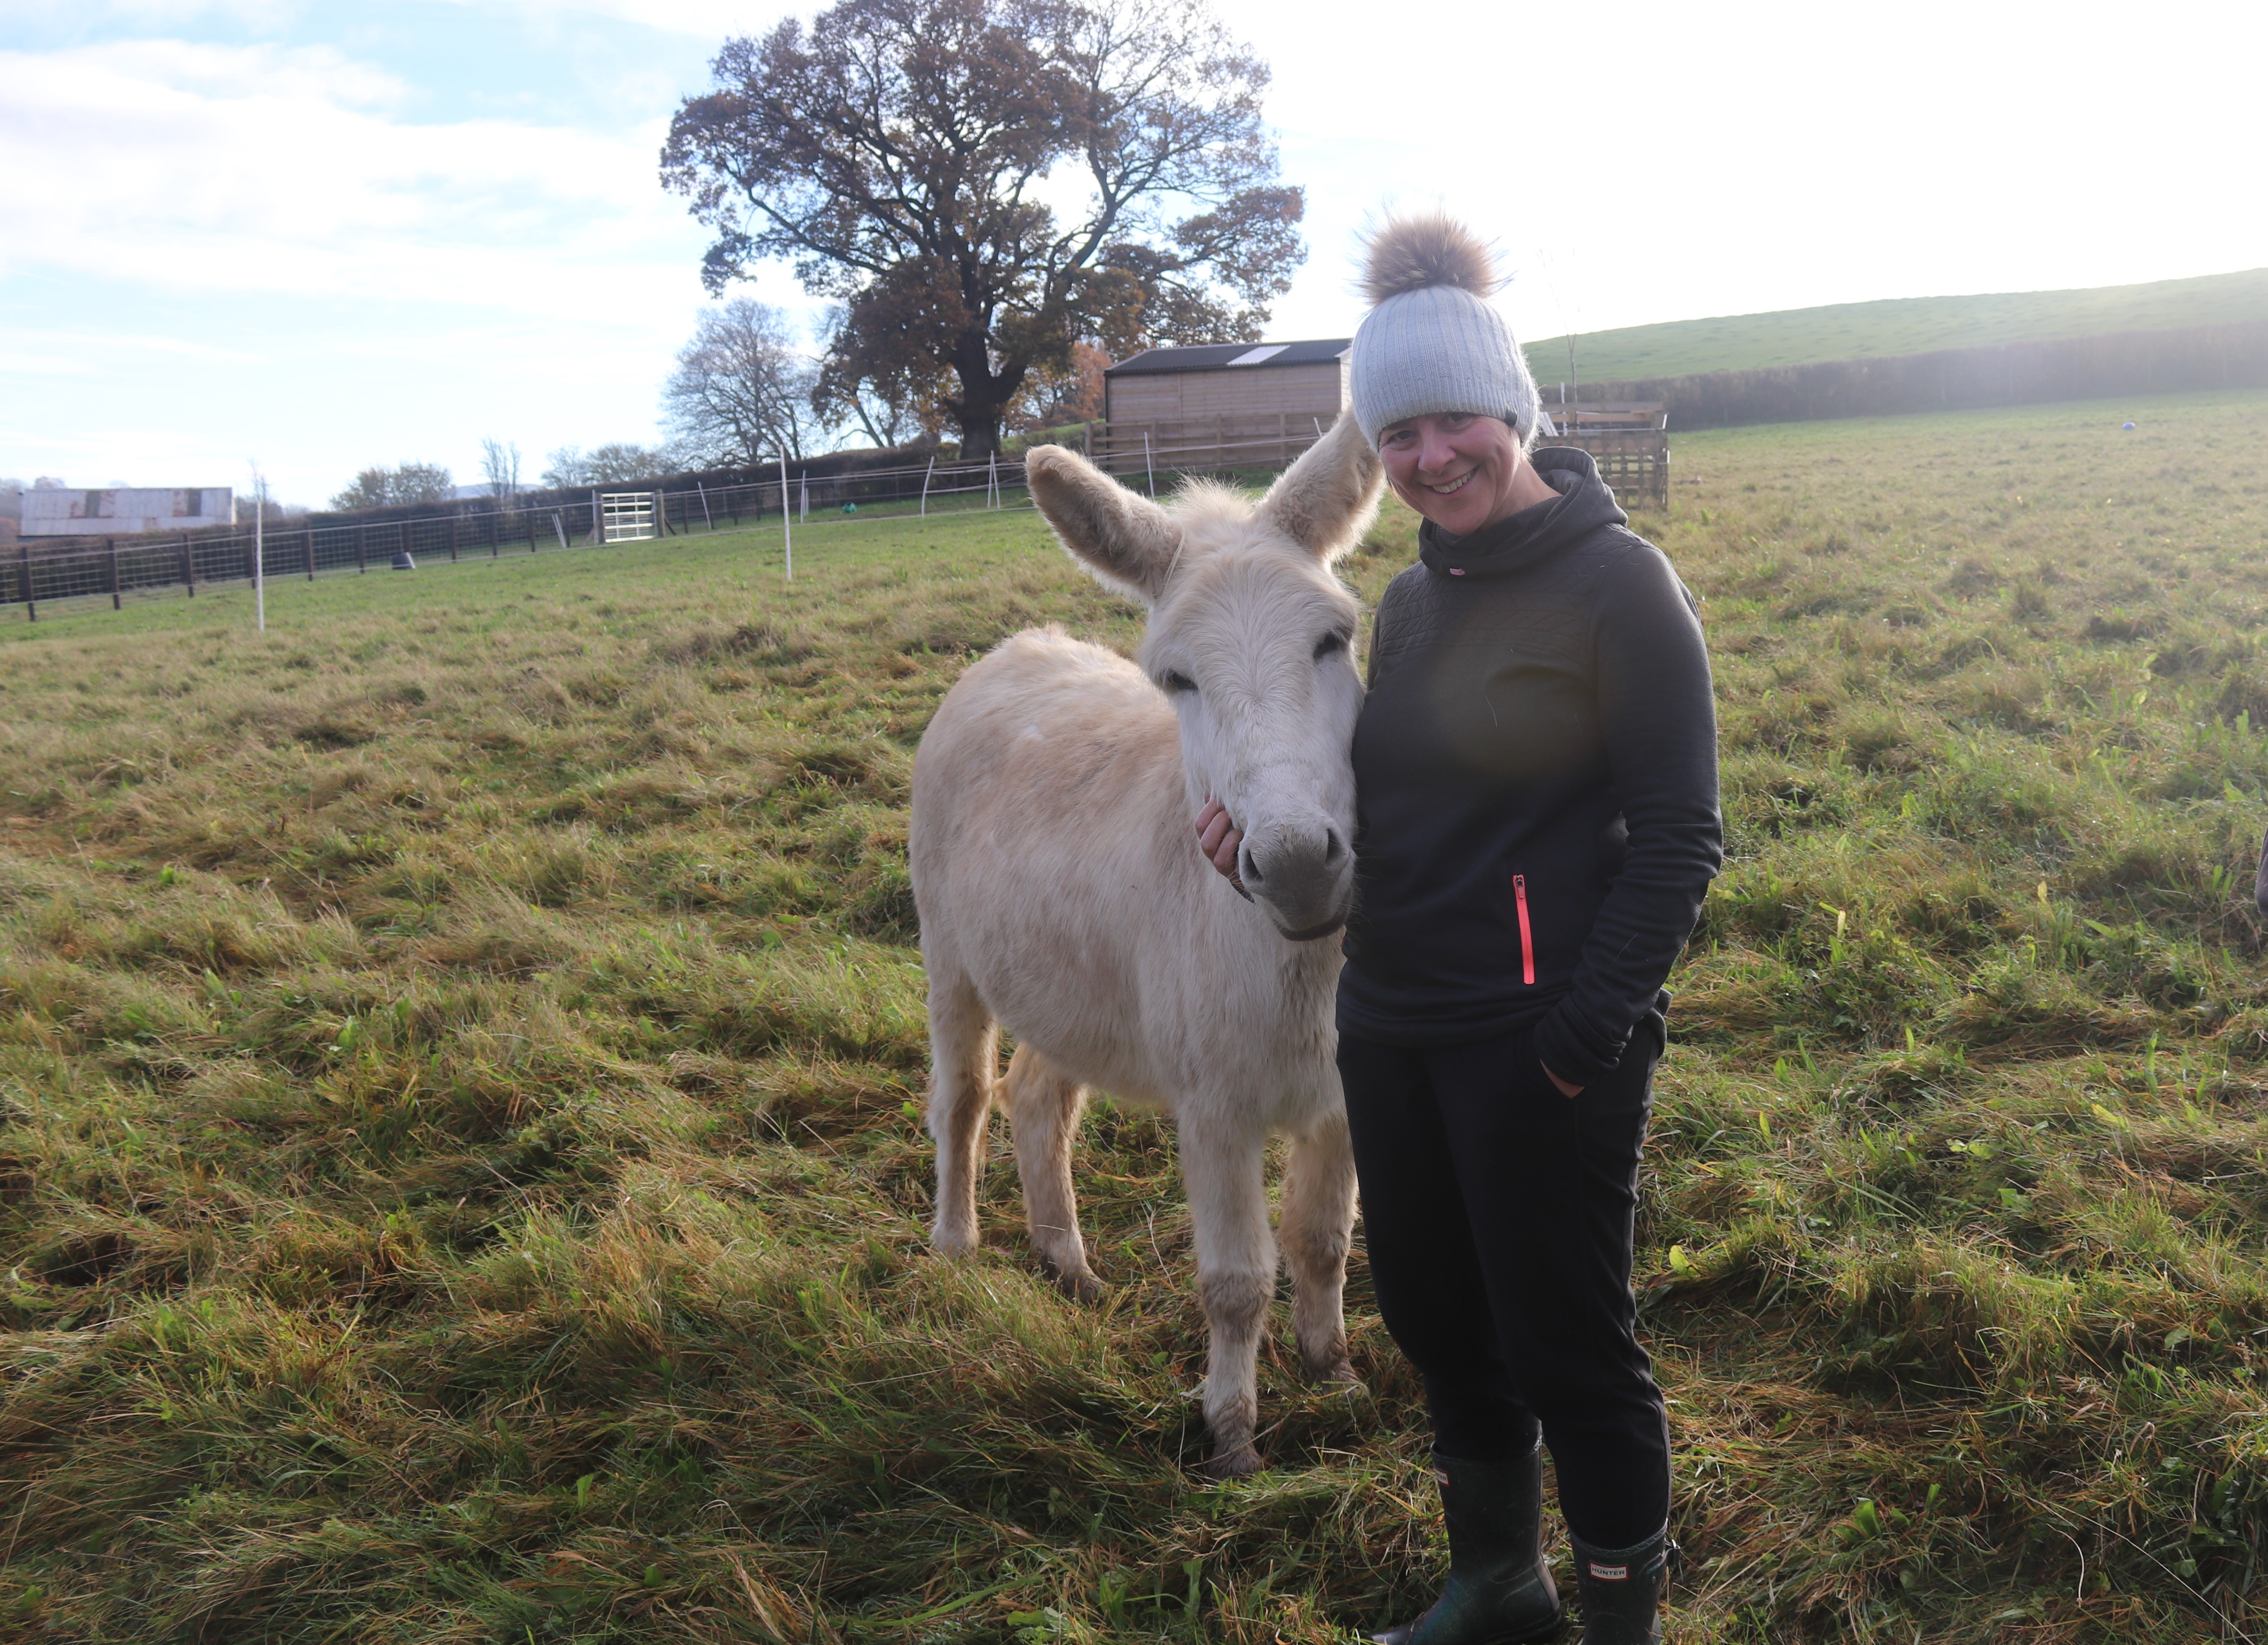 Brays of Christmas Cheer for donkeys in new home